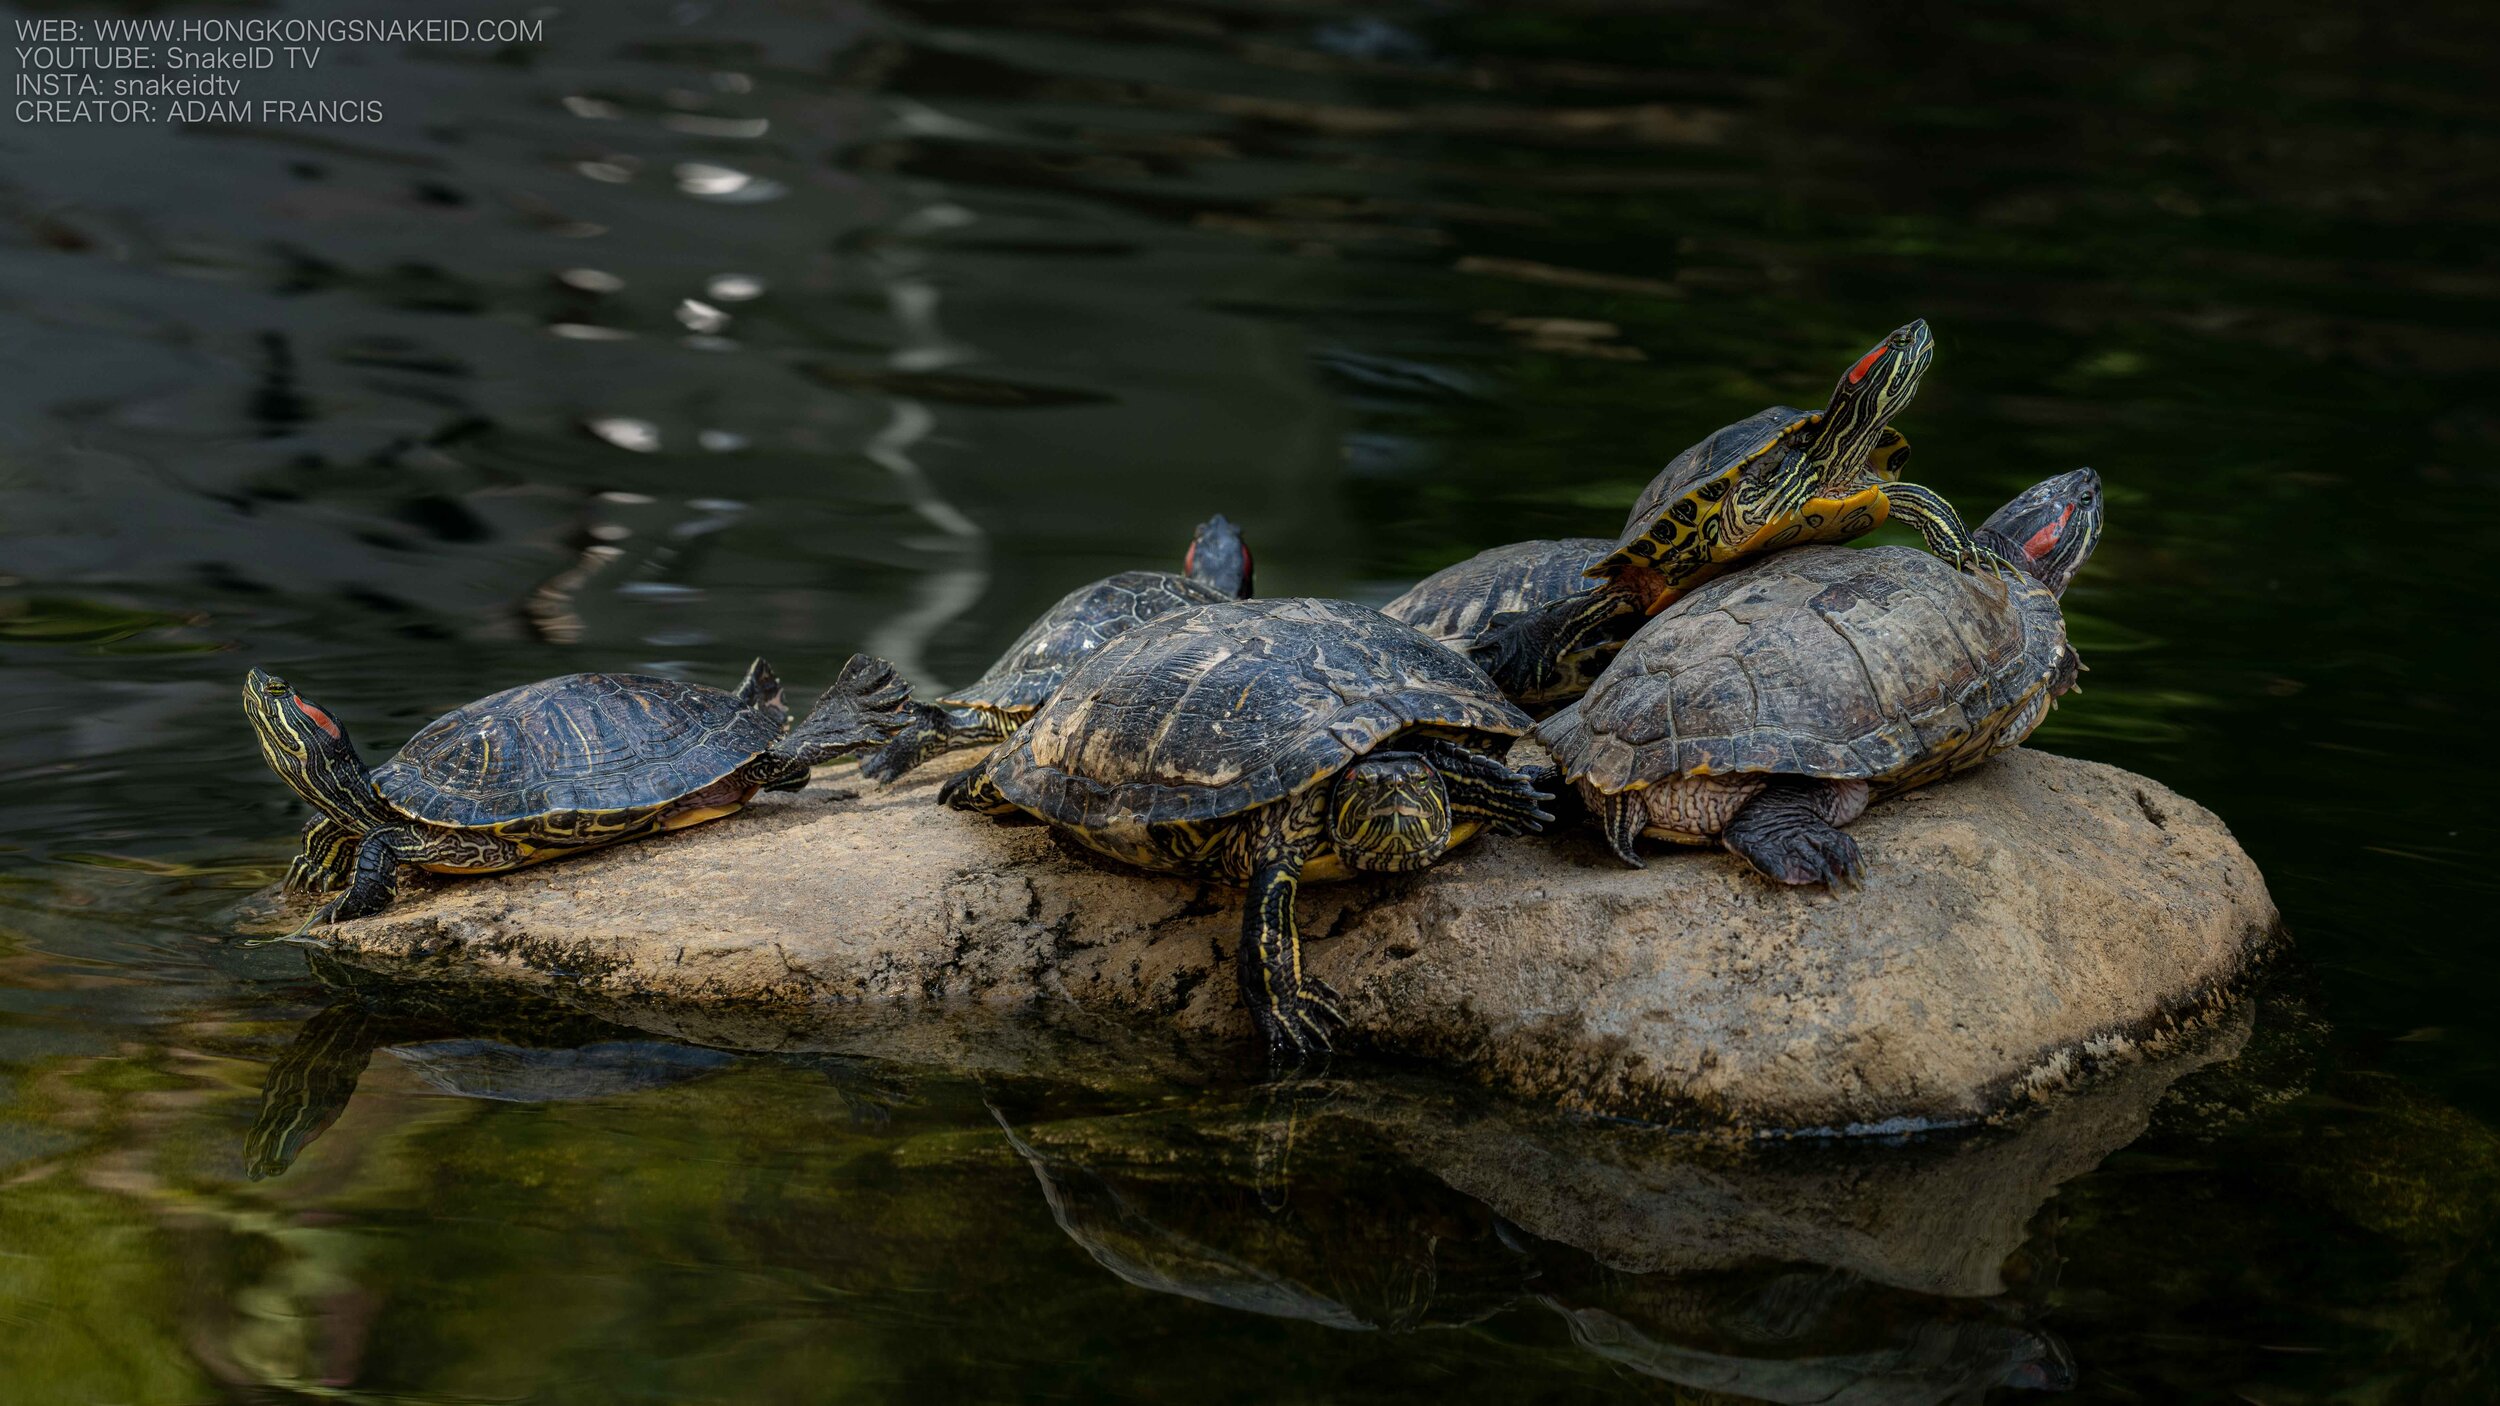 Are Red Eared Slider Turtles Nocturnal? 2